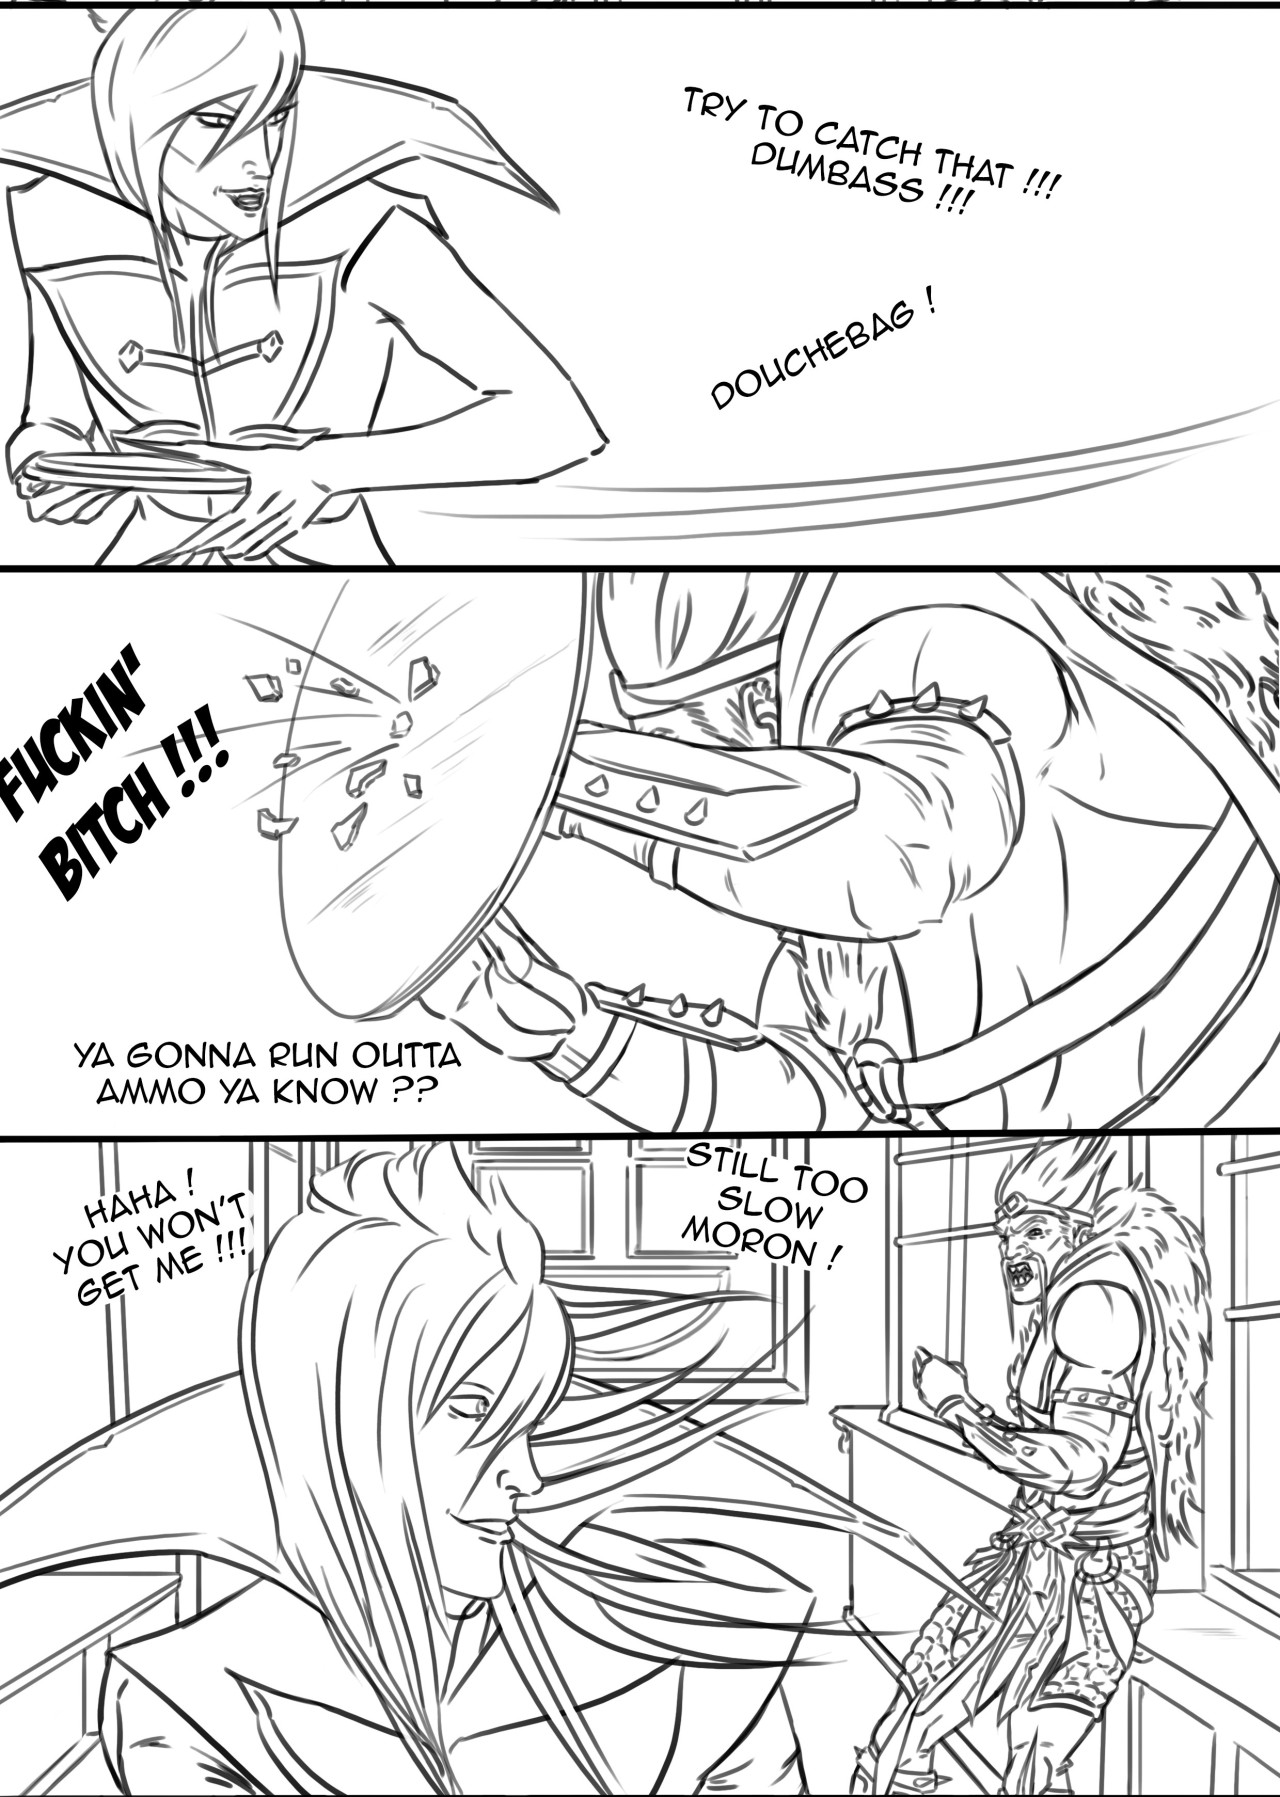 DRAVIMIR comic 2 -part 2-  Papa ou Maman parody scene 2 with Ekko and Zoe as one of the children adopted by the craziest noxian couple #League of Legends #draven#ekko #ekko league of legends  #draven x vladimir  #draven league of legends #dravimir #zoe league of legends #draven lol#parody#funny#funny comics#lol fanart #league of fanart  #LoL League of Legends  #league of legends art  #league of legends fanart #art